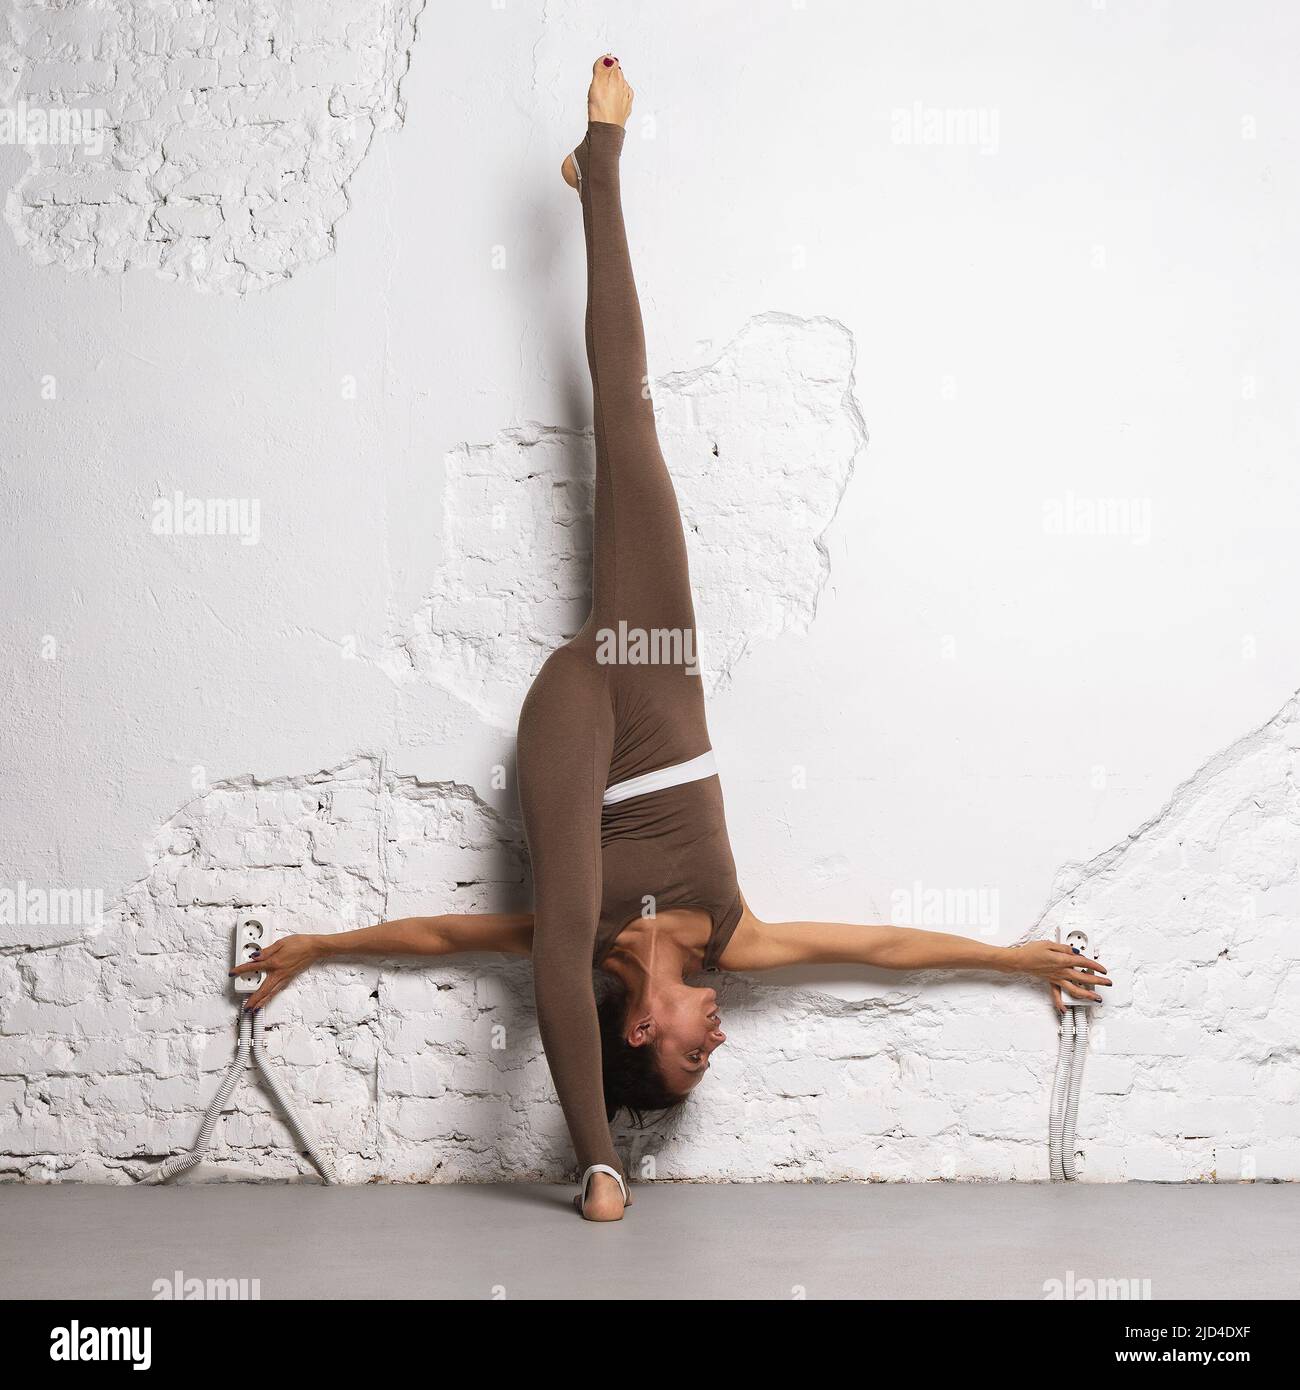 A woman is engaged in stretching the muscles of her legs, performs a longitudinal split, leaning her back against the wall, and trains in the room Stock Photo